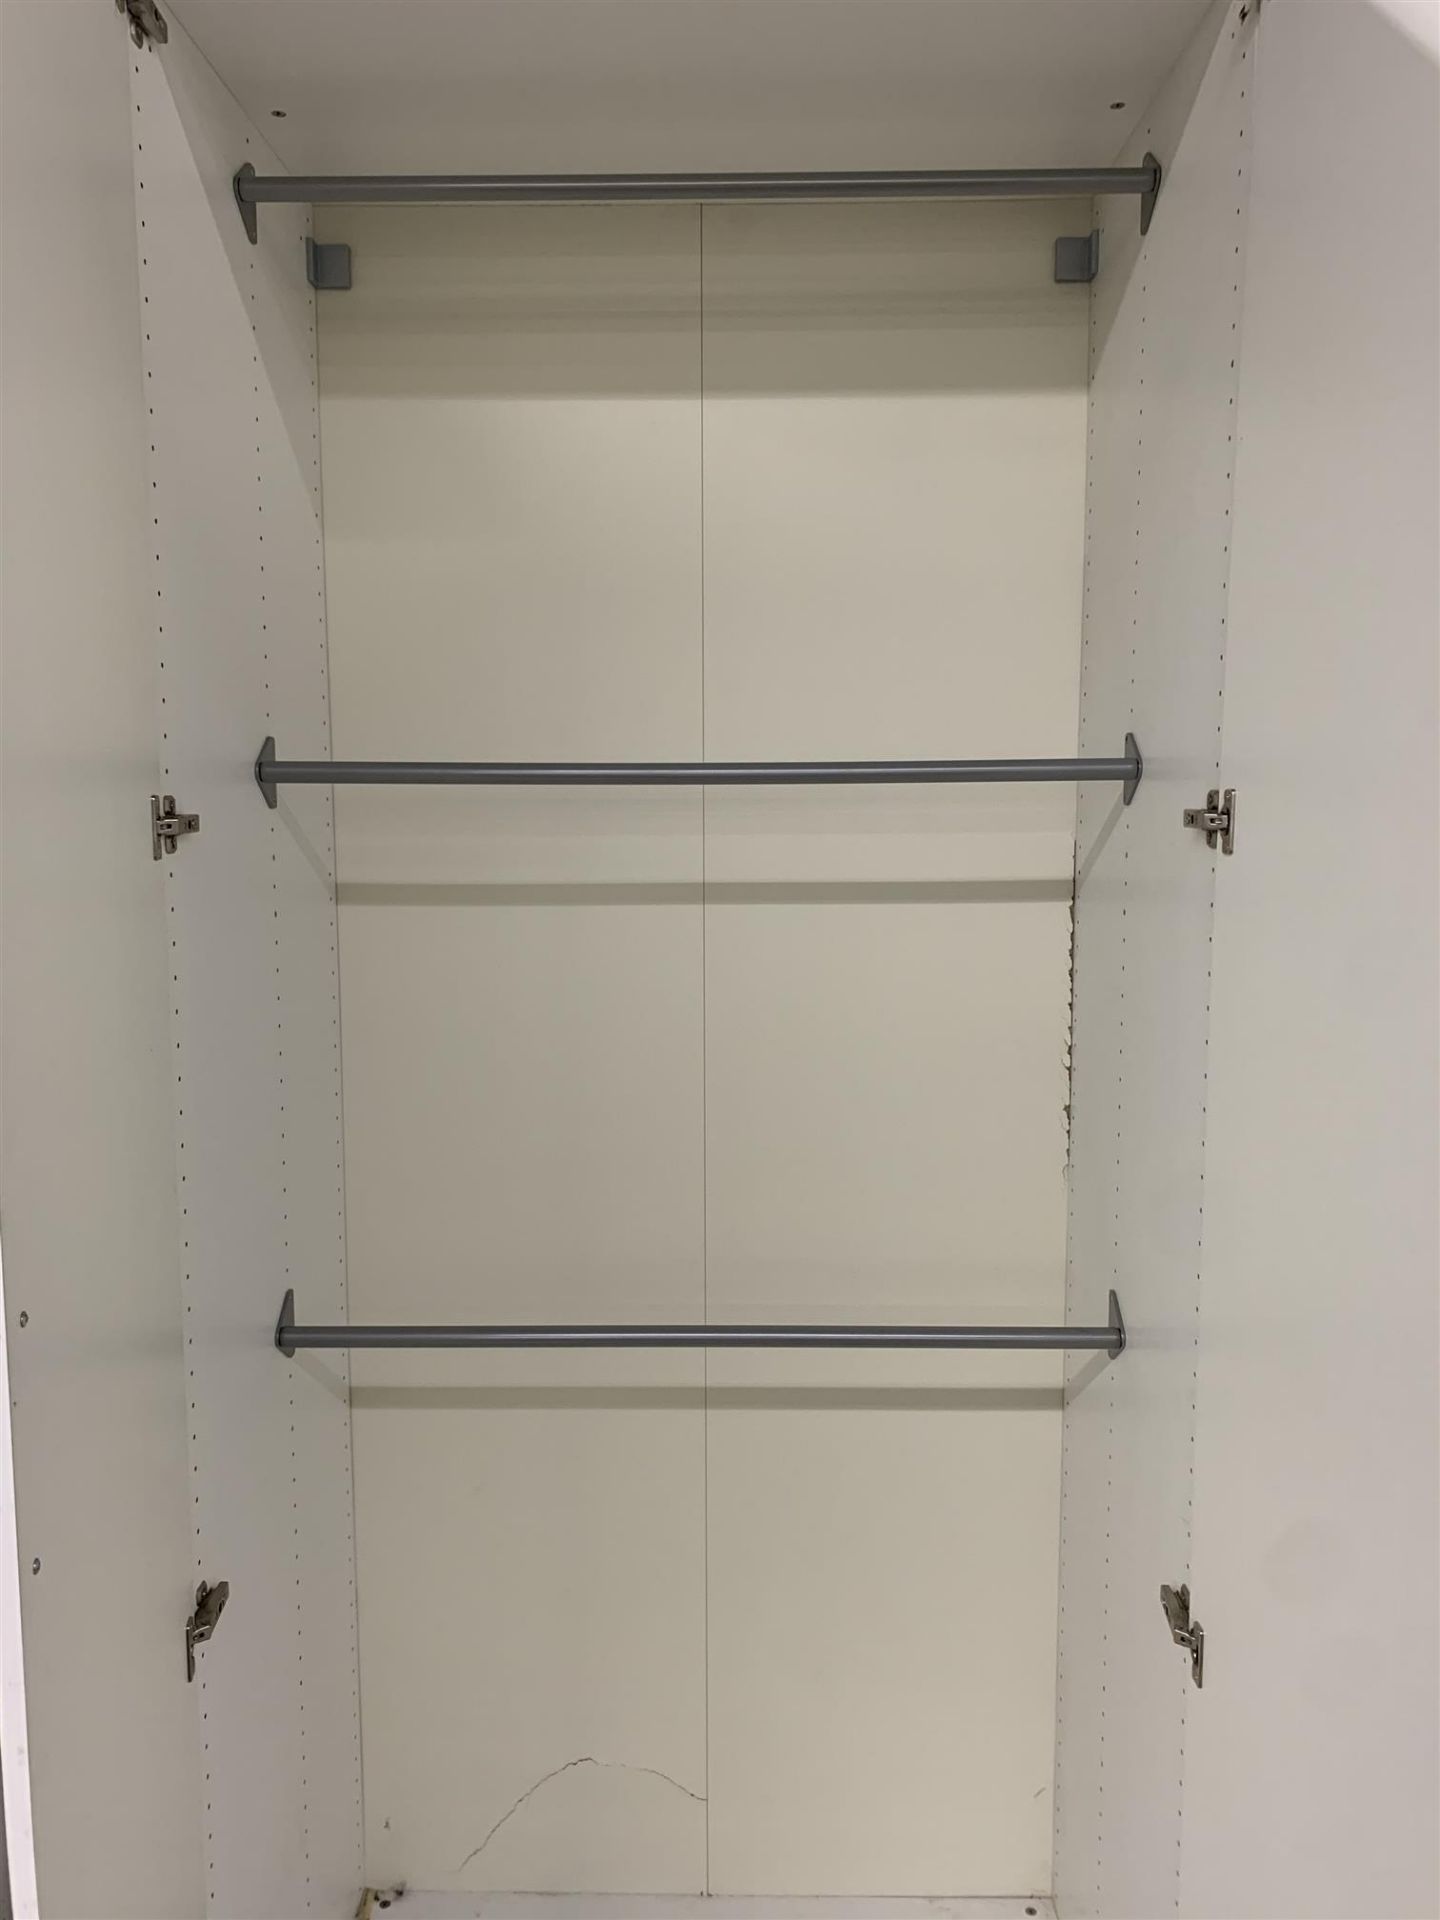 LARGE 2 DOOR WALL CABINET - Image 2 of 2